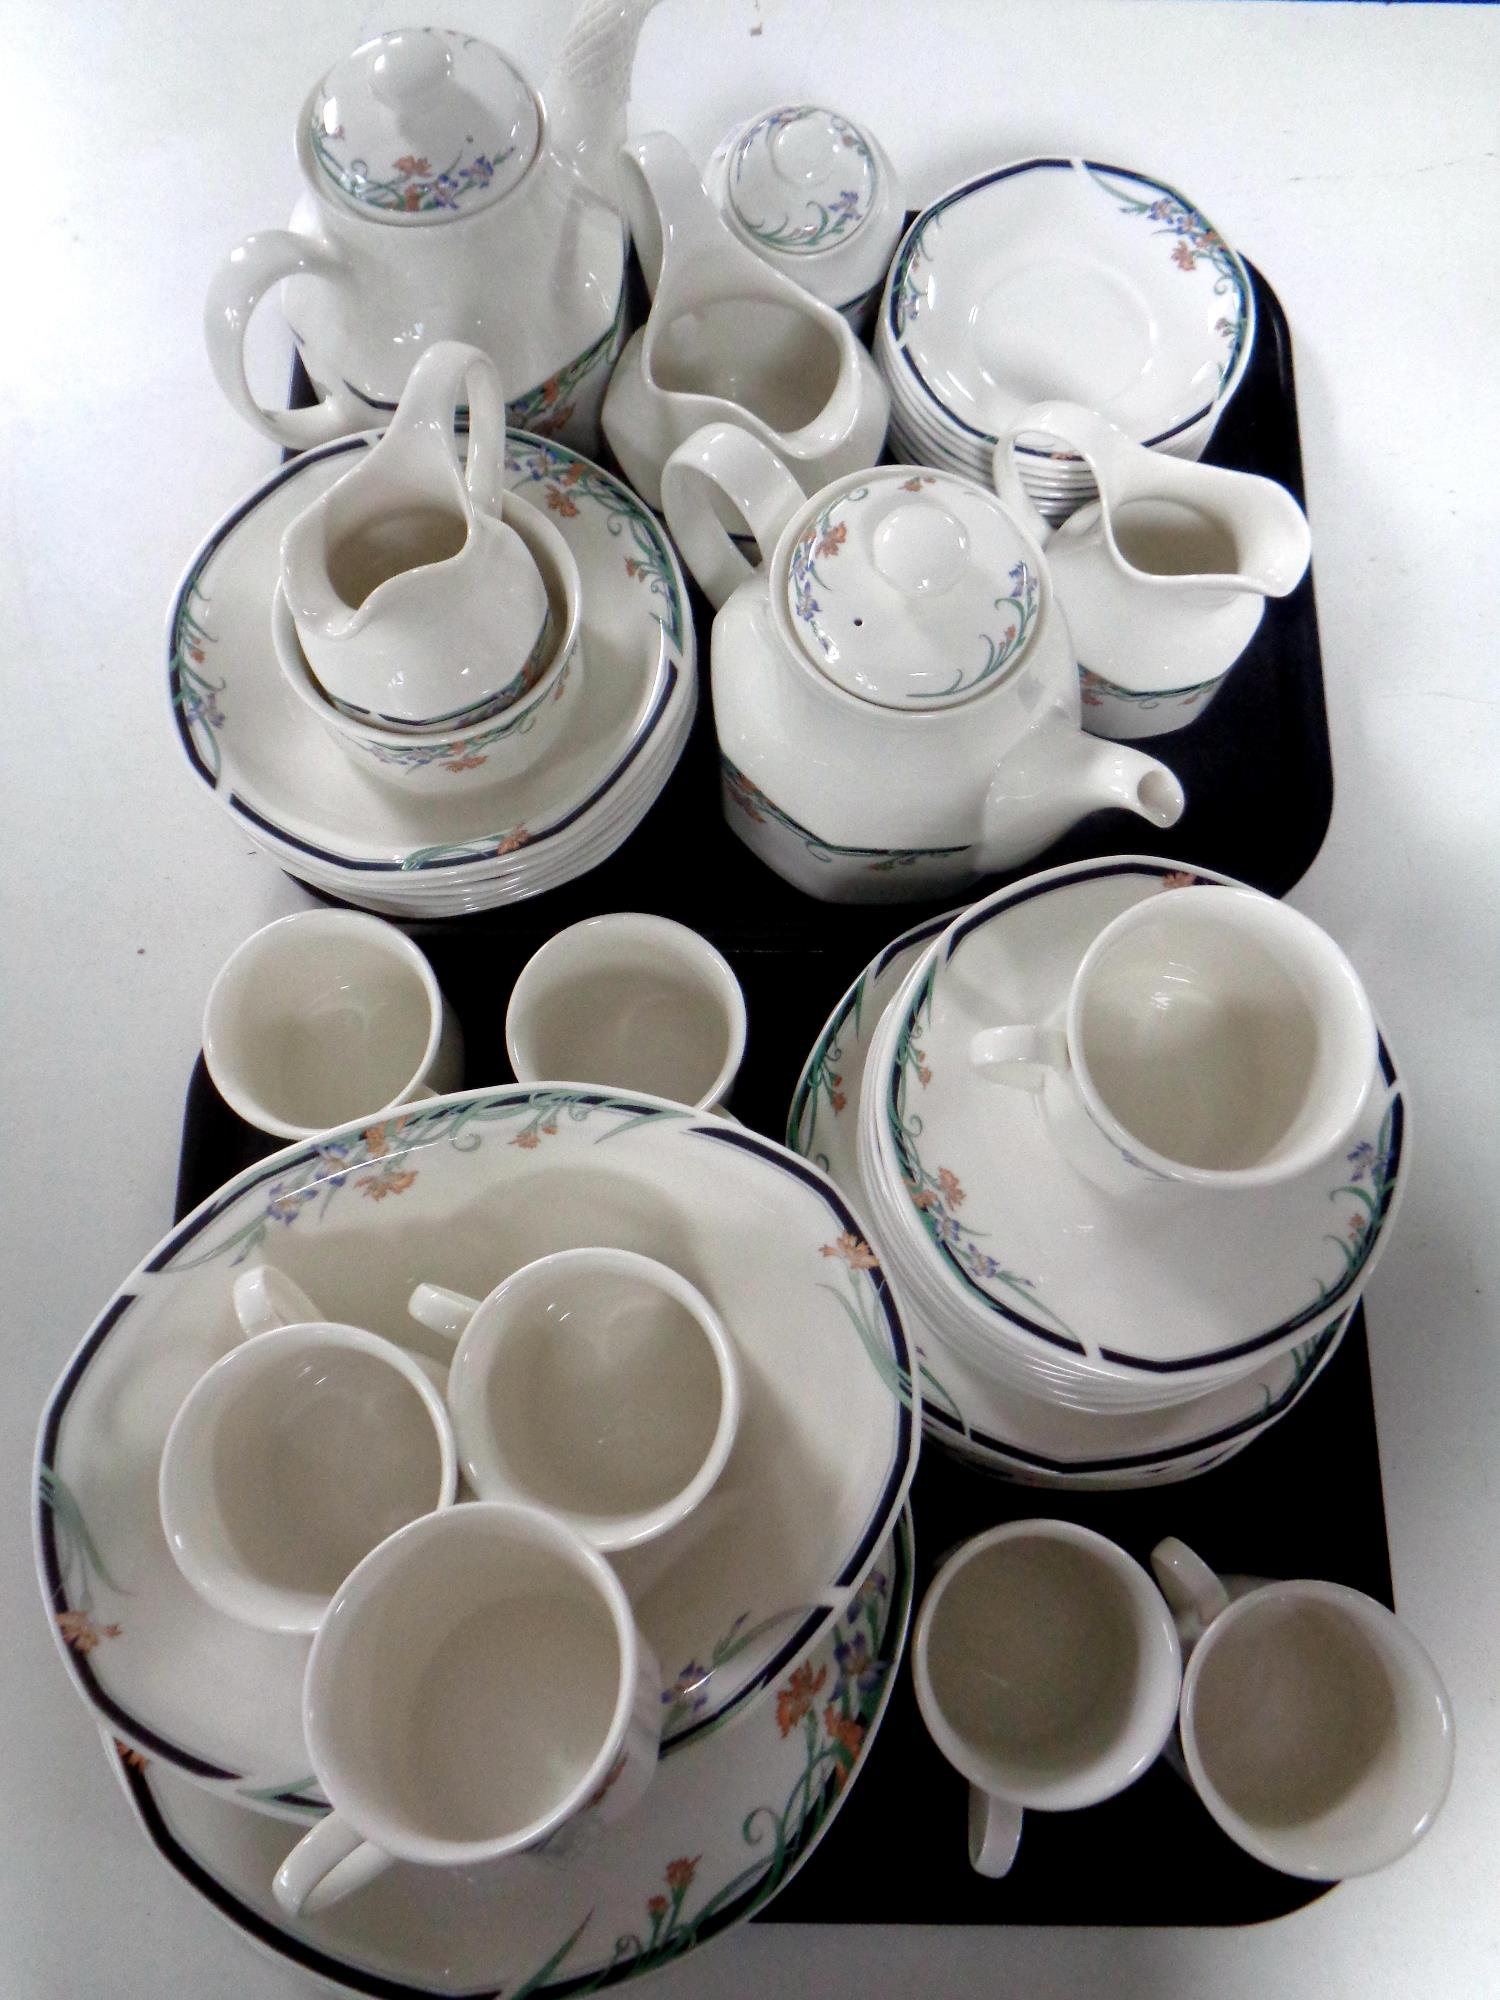 A tray containing an extensive Royal Doulton Juno tea and dinner service